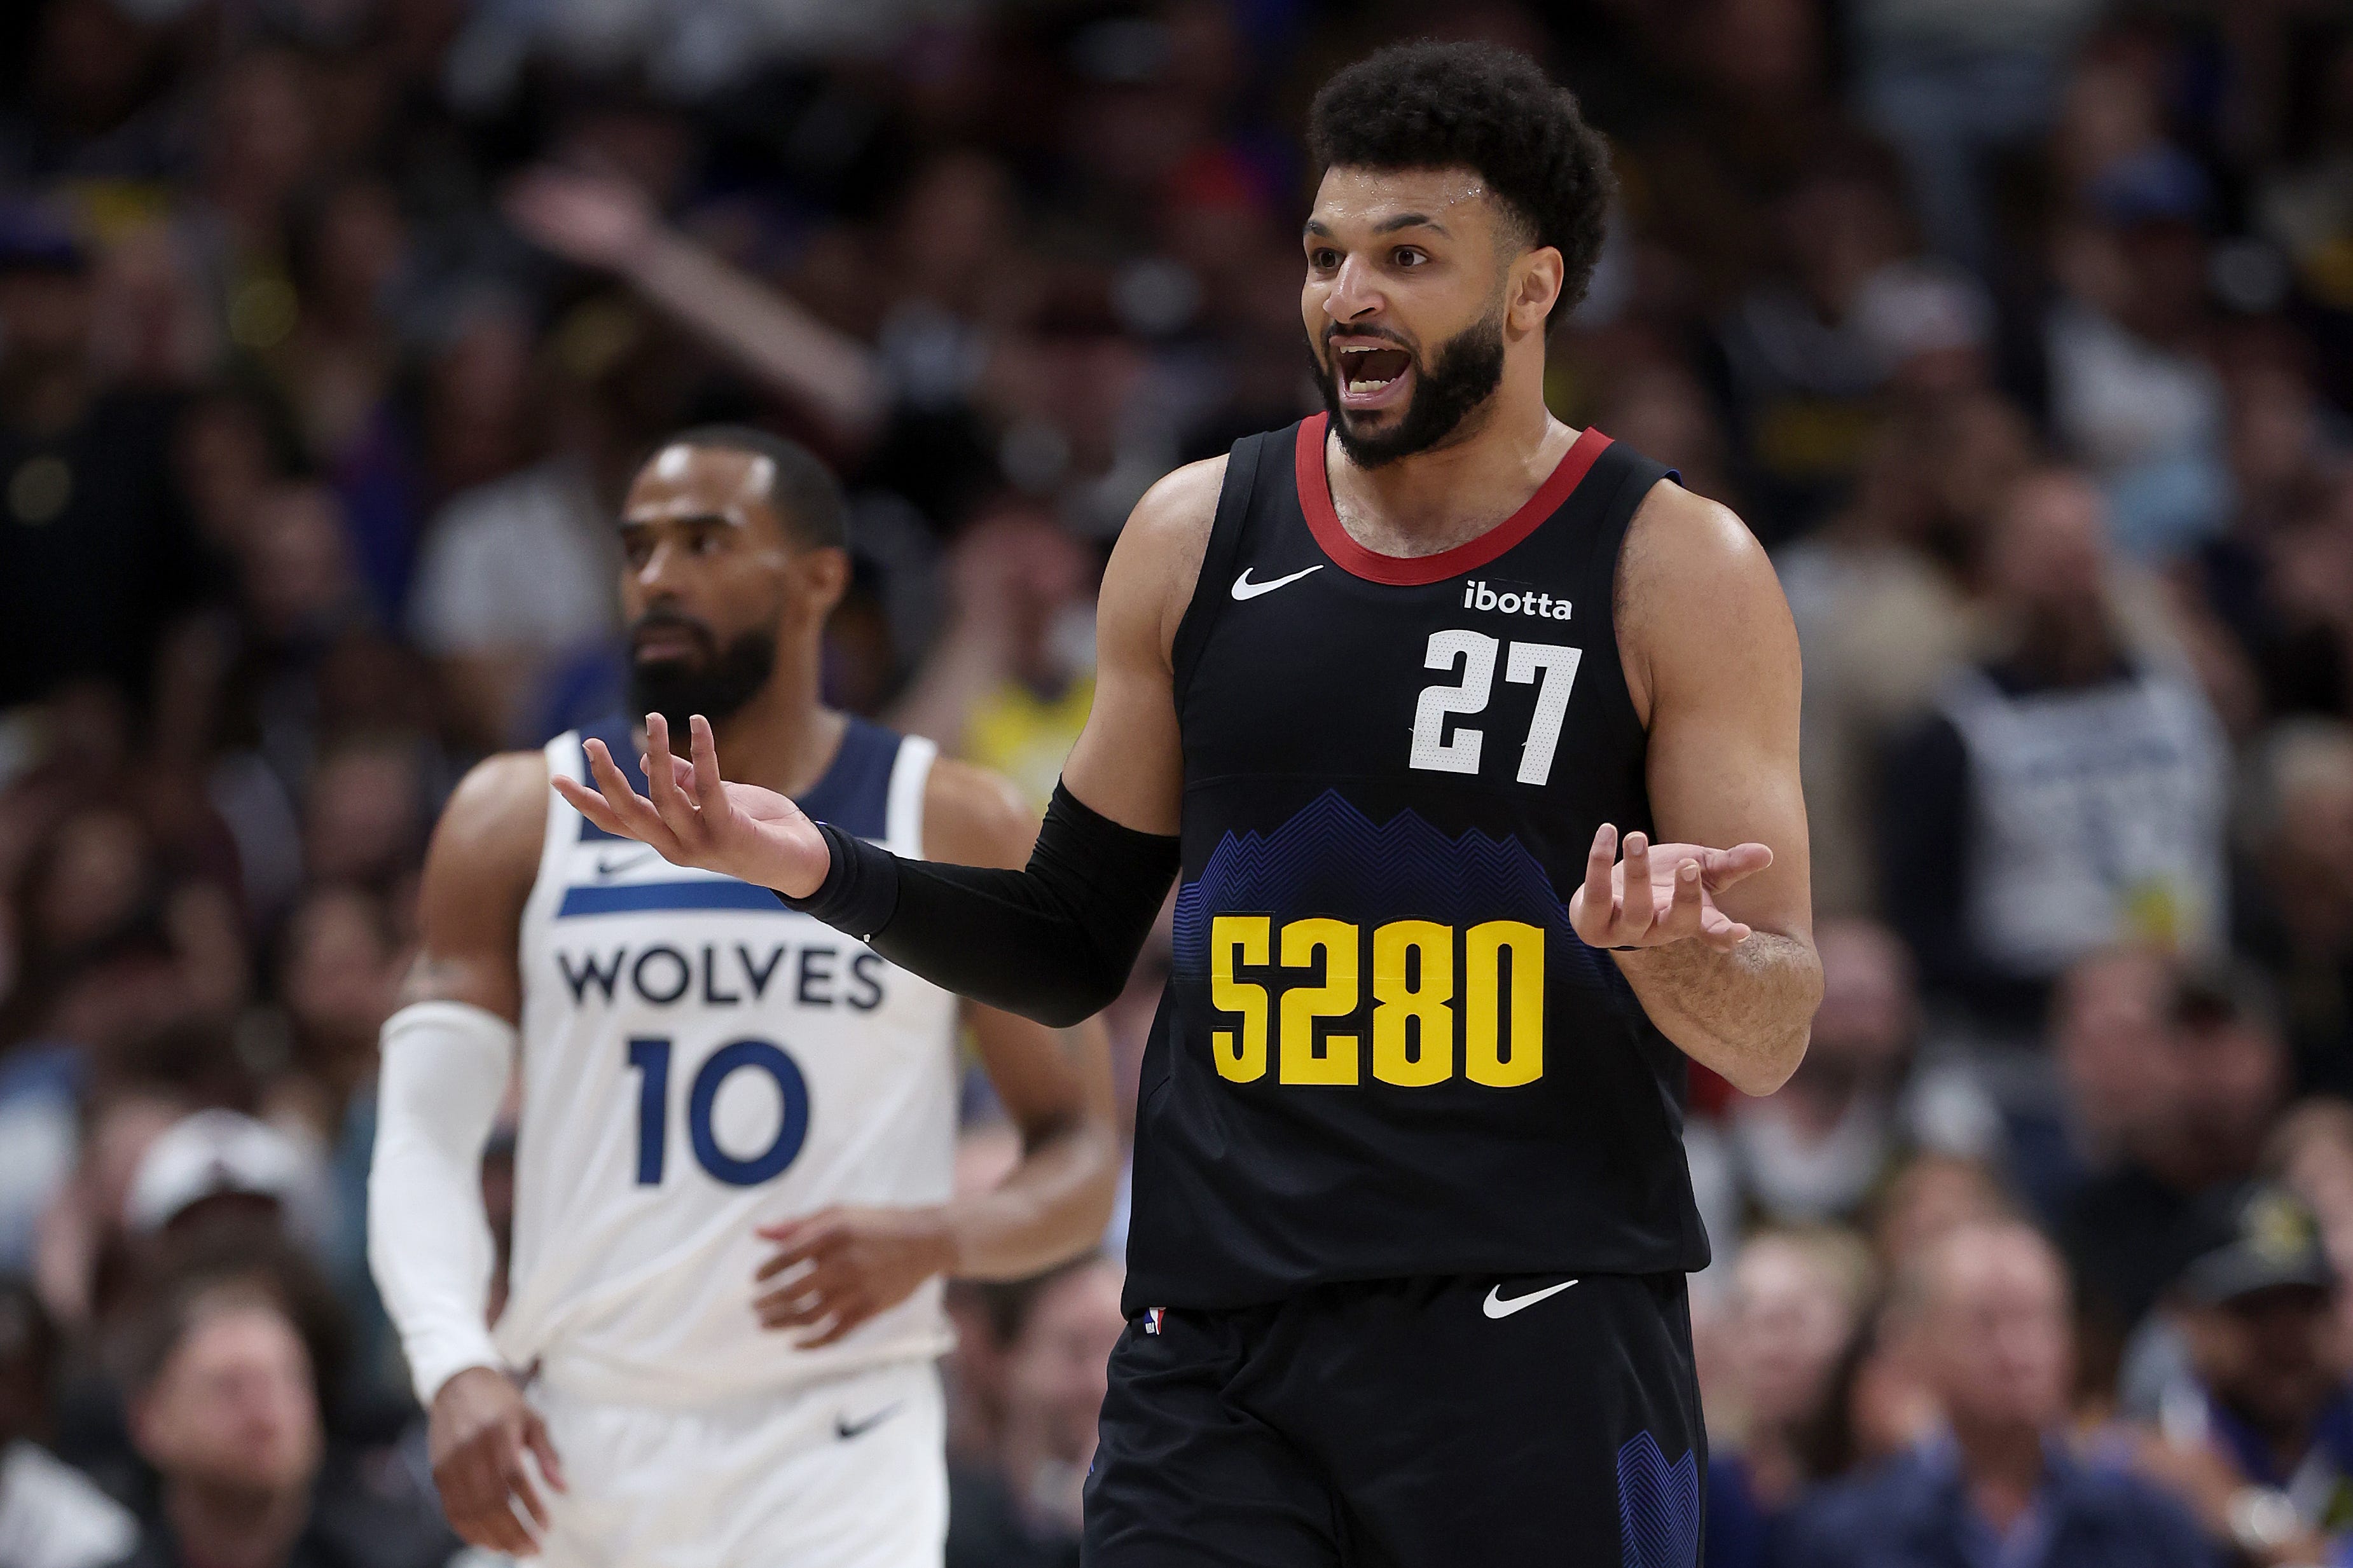 nuggets' jamal murray hit with $100,000 fine for throwing objects in direction of ref